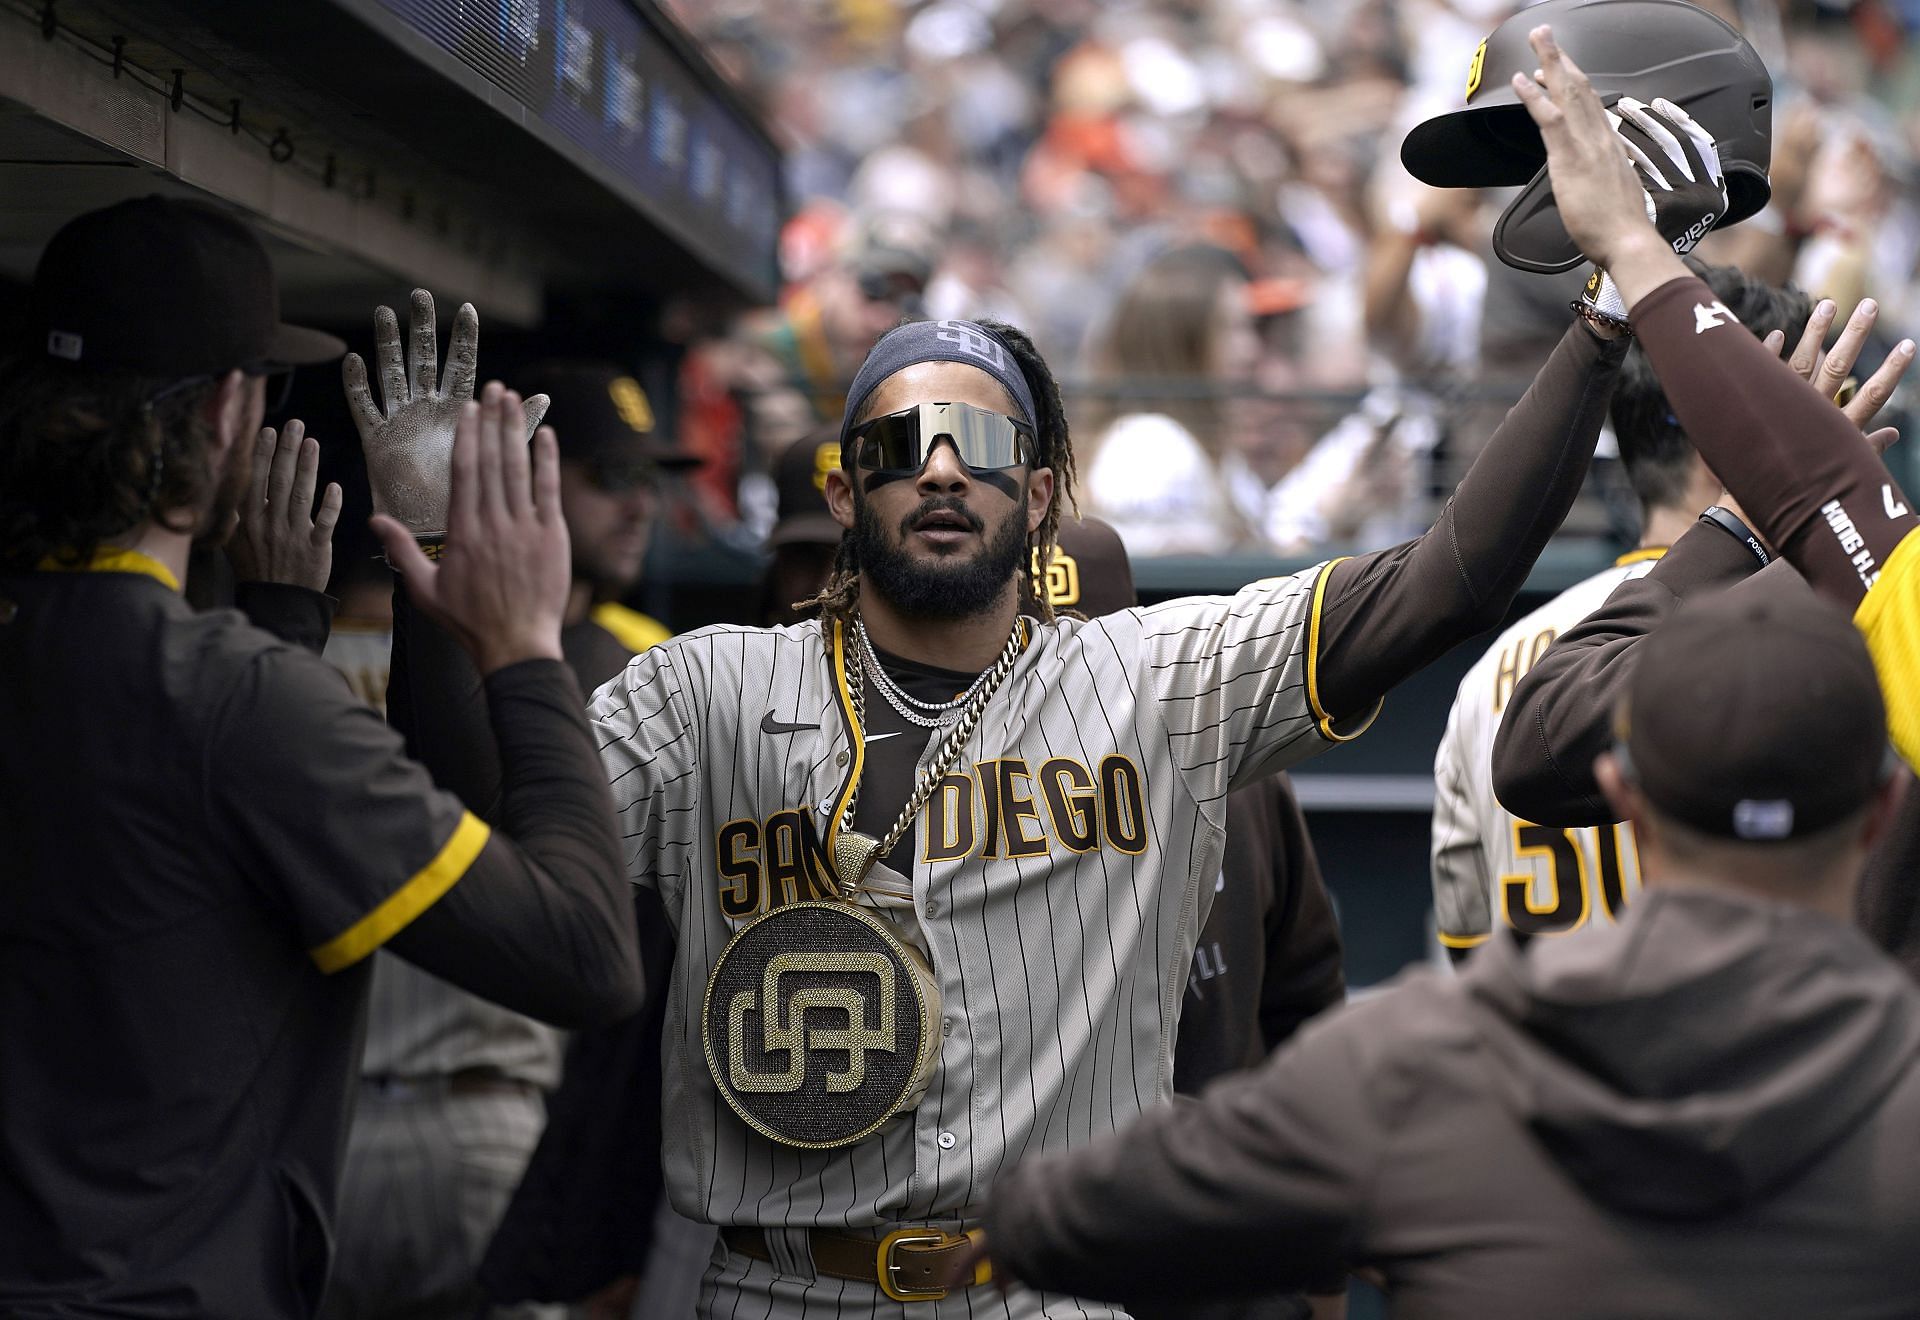 Fernando Tatis Jr. #23 of the San Diego Padres reacts after